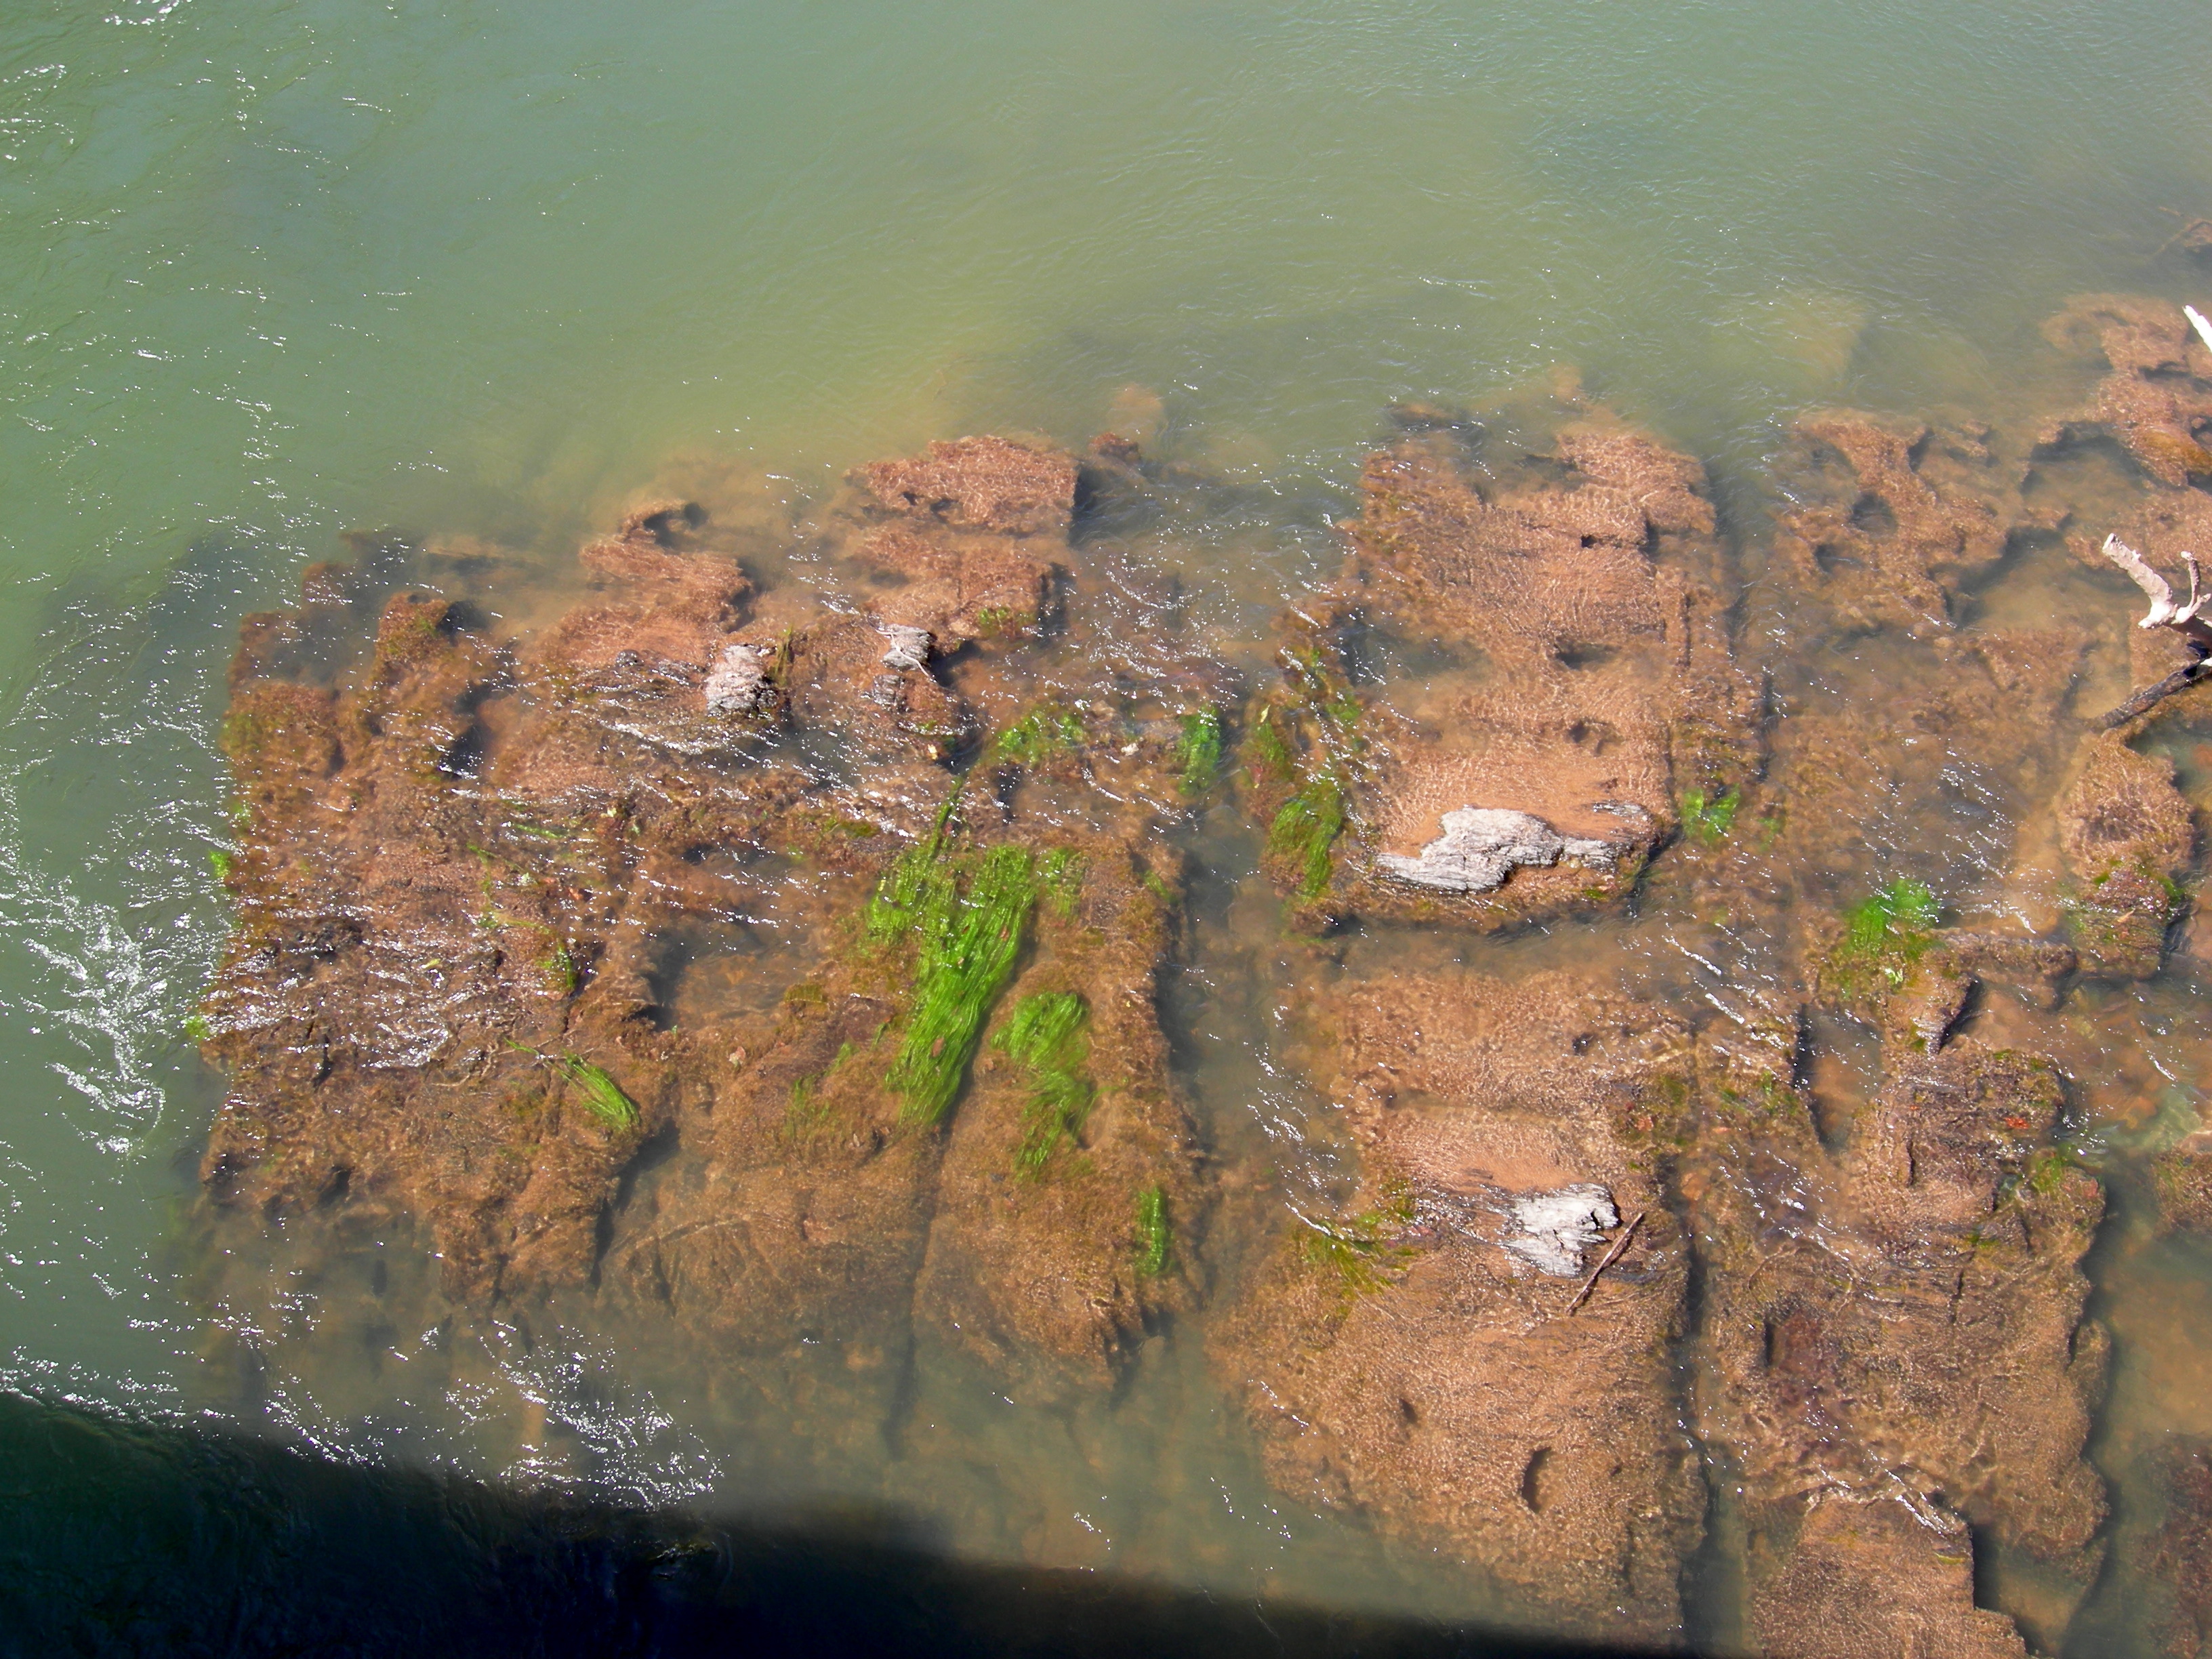 algae on the rock formations